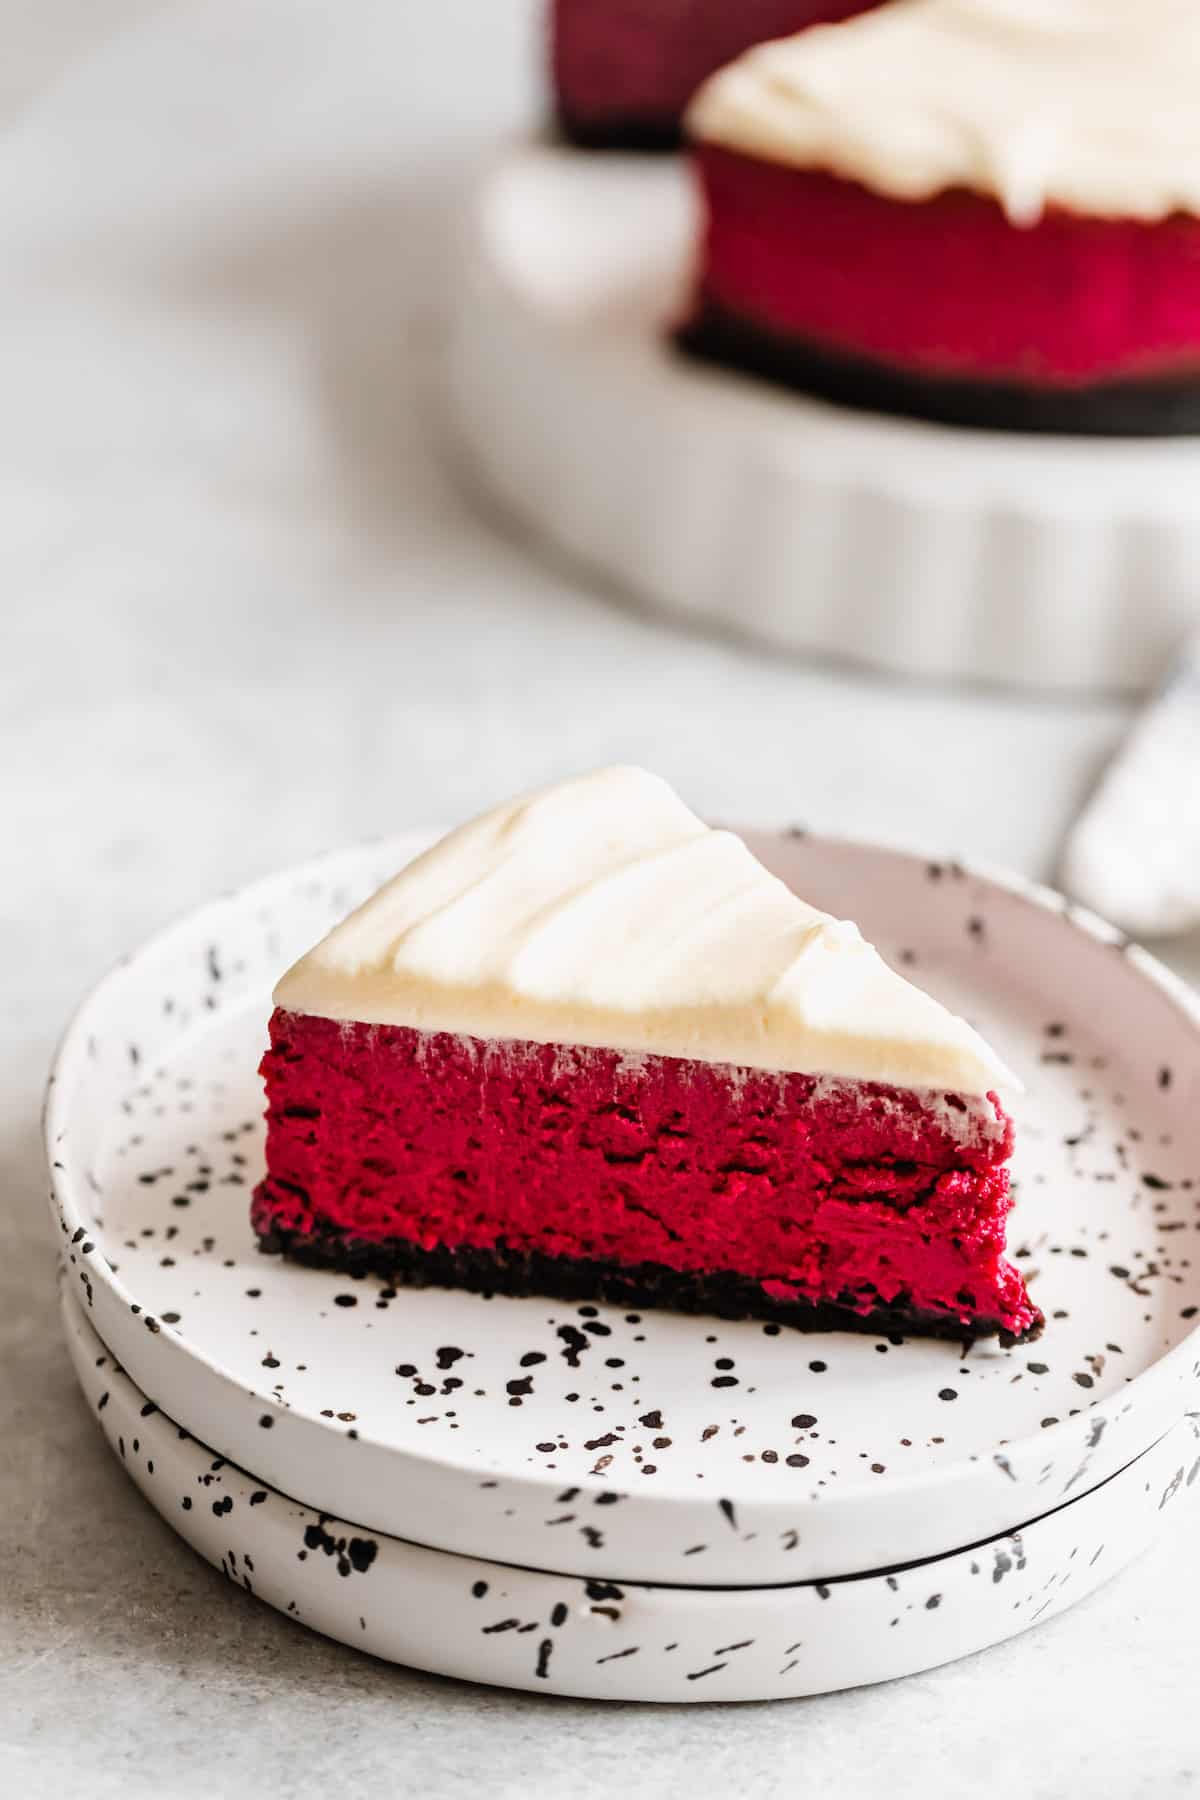 A Piece of Red Velvet Cheesecake on a Black and White Speckled Plate